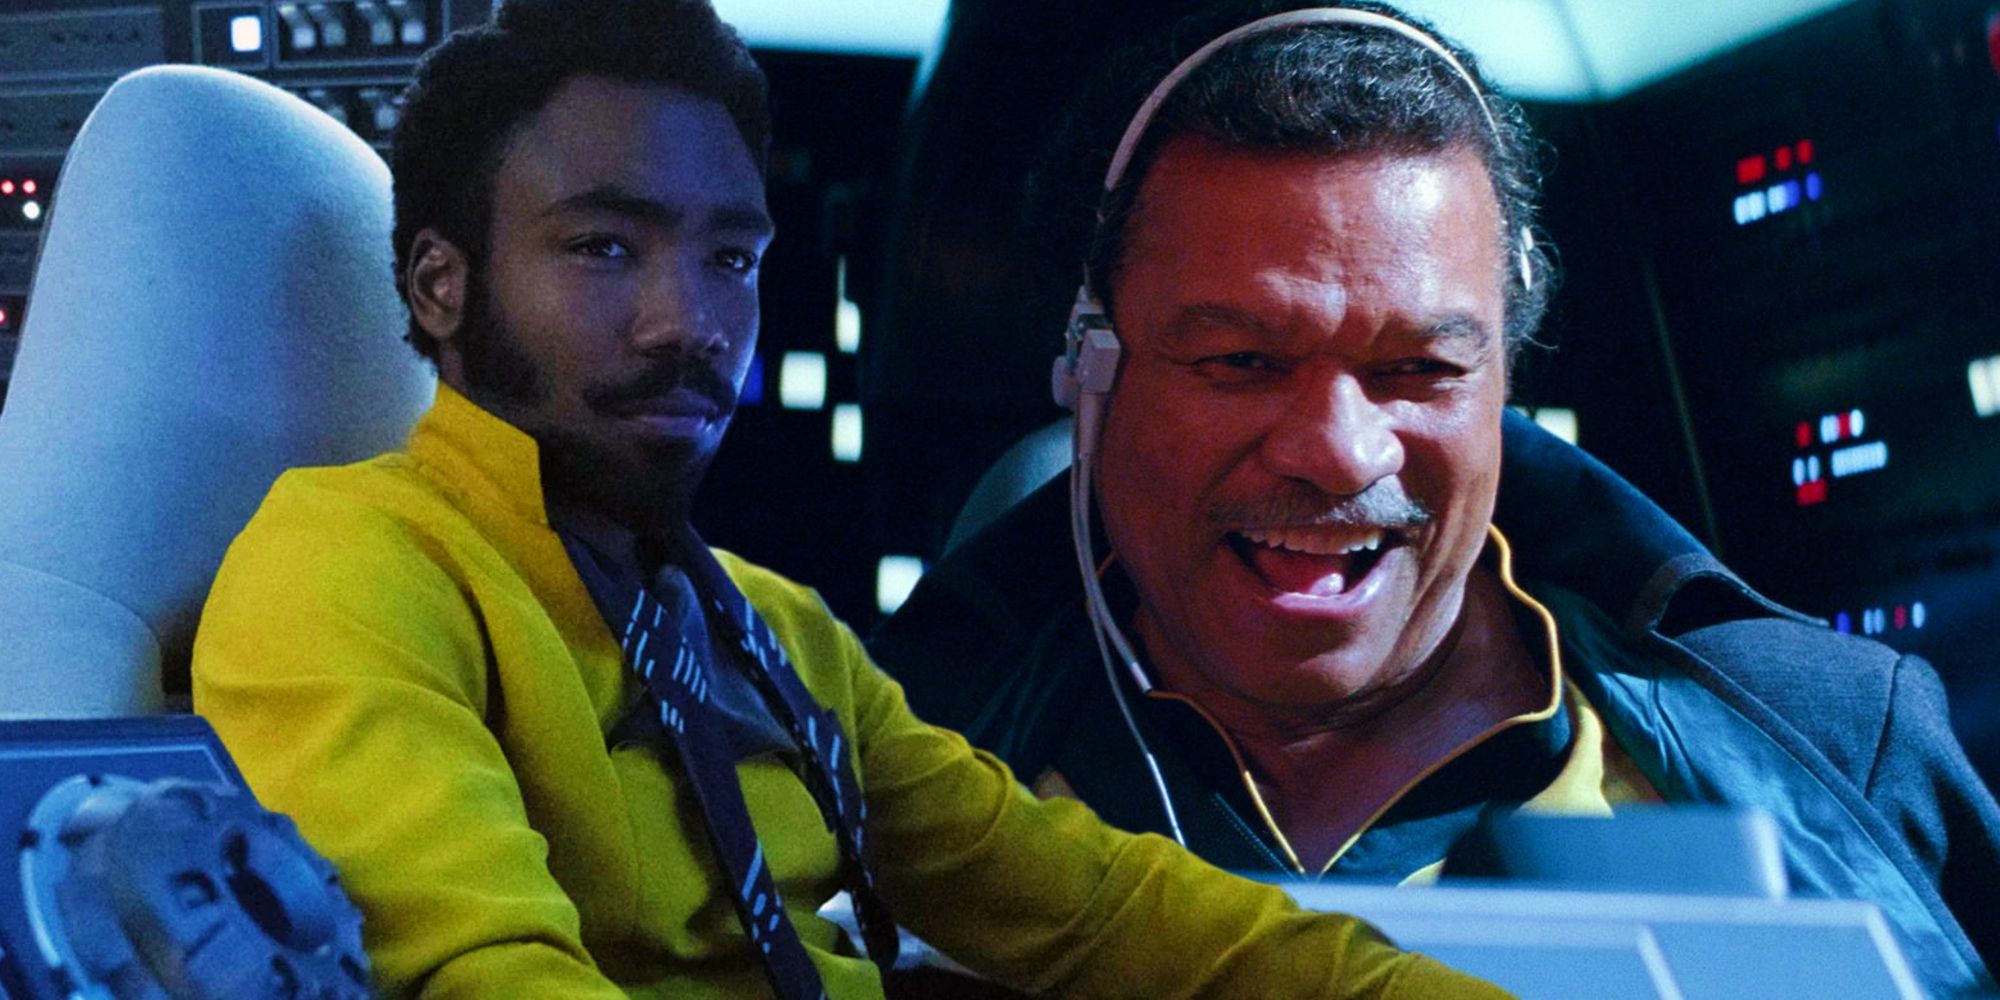 Donald Glover and Billy Dee Williams as their respective versions of Lando Calrissian